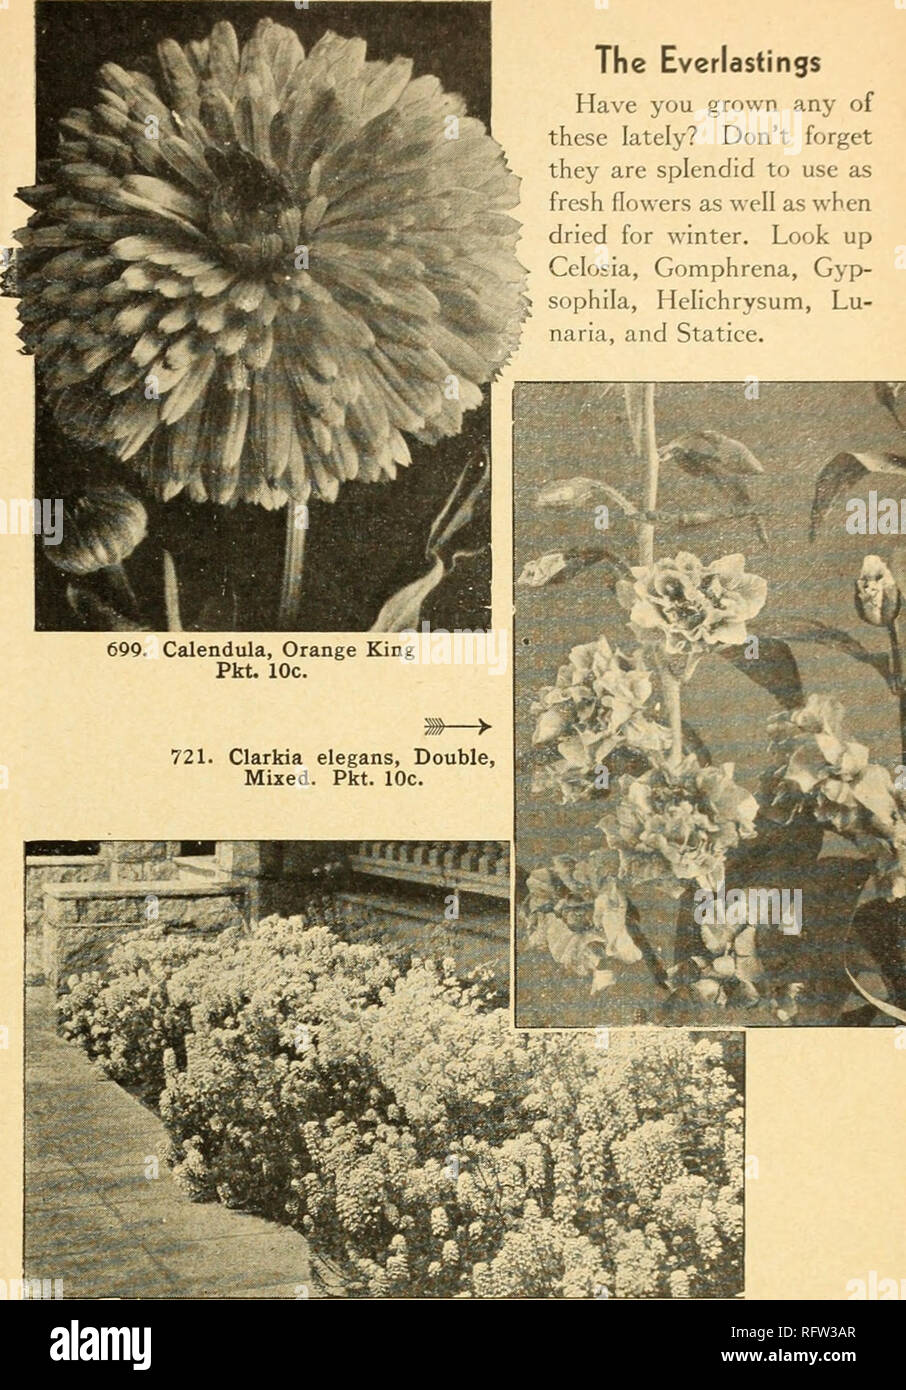 . Capitol city seeds for 1944. Nurseries (Horticulture) Catalogs; Bulbs (Plants) Catalogs; Vegetables Catalogs; Garden tools Catalogs; Seeds Catalogs. Canterbury Bells a., b. 708. Campanula medium, Single, Mixed. B. Beautiful bell-like flowers of blue, pink, and white in early summer. A splendid border plant. 2 ft. Pkt. 10c; j^oz. 40c; y2oz. 75c 709. Annual Canterbury Bells, Mixed. A. Blooms in less than 5 months after sowing and by successive plant- ings one can have Canterbury Bells right up to frost. A mixture of various shades of blue, pink, rose, and whit e. 2 ft. Pkt. 10c; M°z. 35c; 3^oz Stock Photo